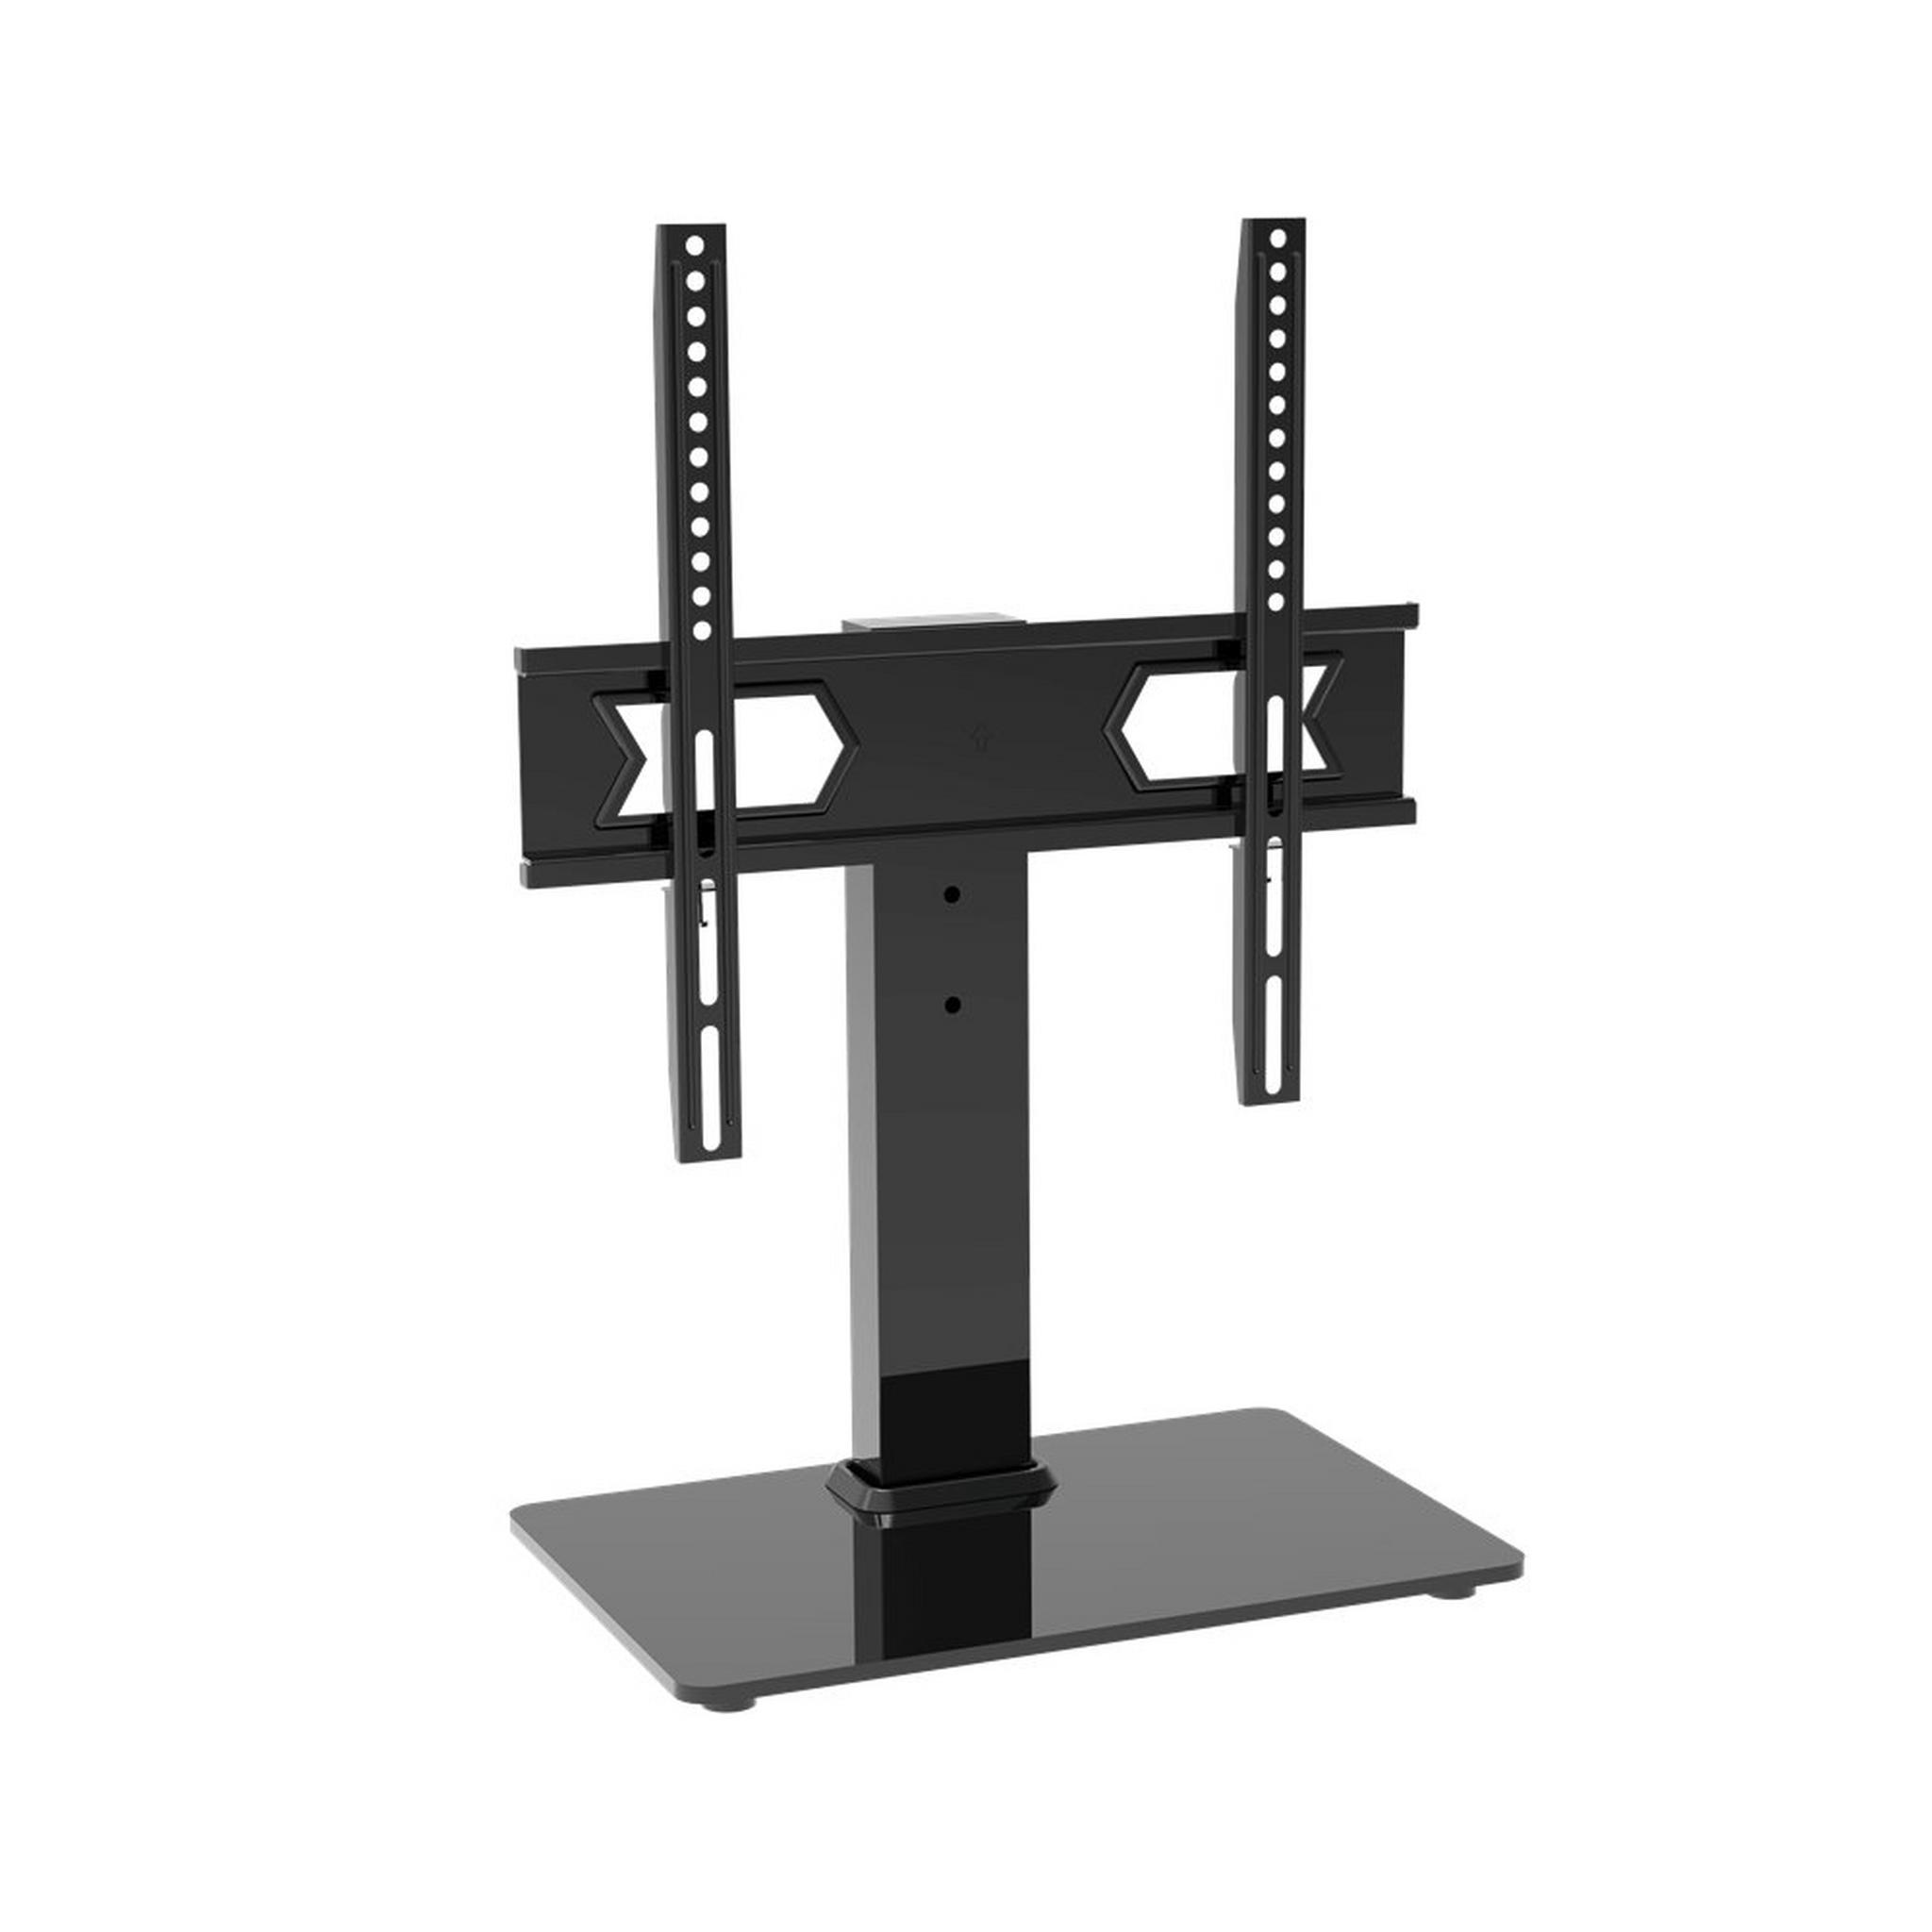 Wansa Glass Basement TV Stand, Fits 23 - 55 inches, 45kg Loading Capacity, STS02-44 - Black